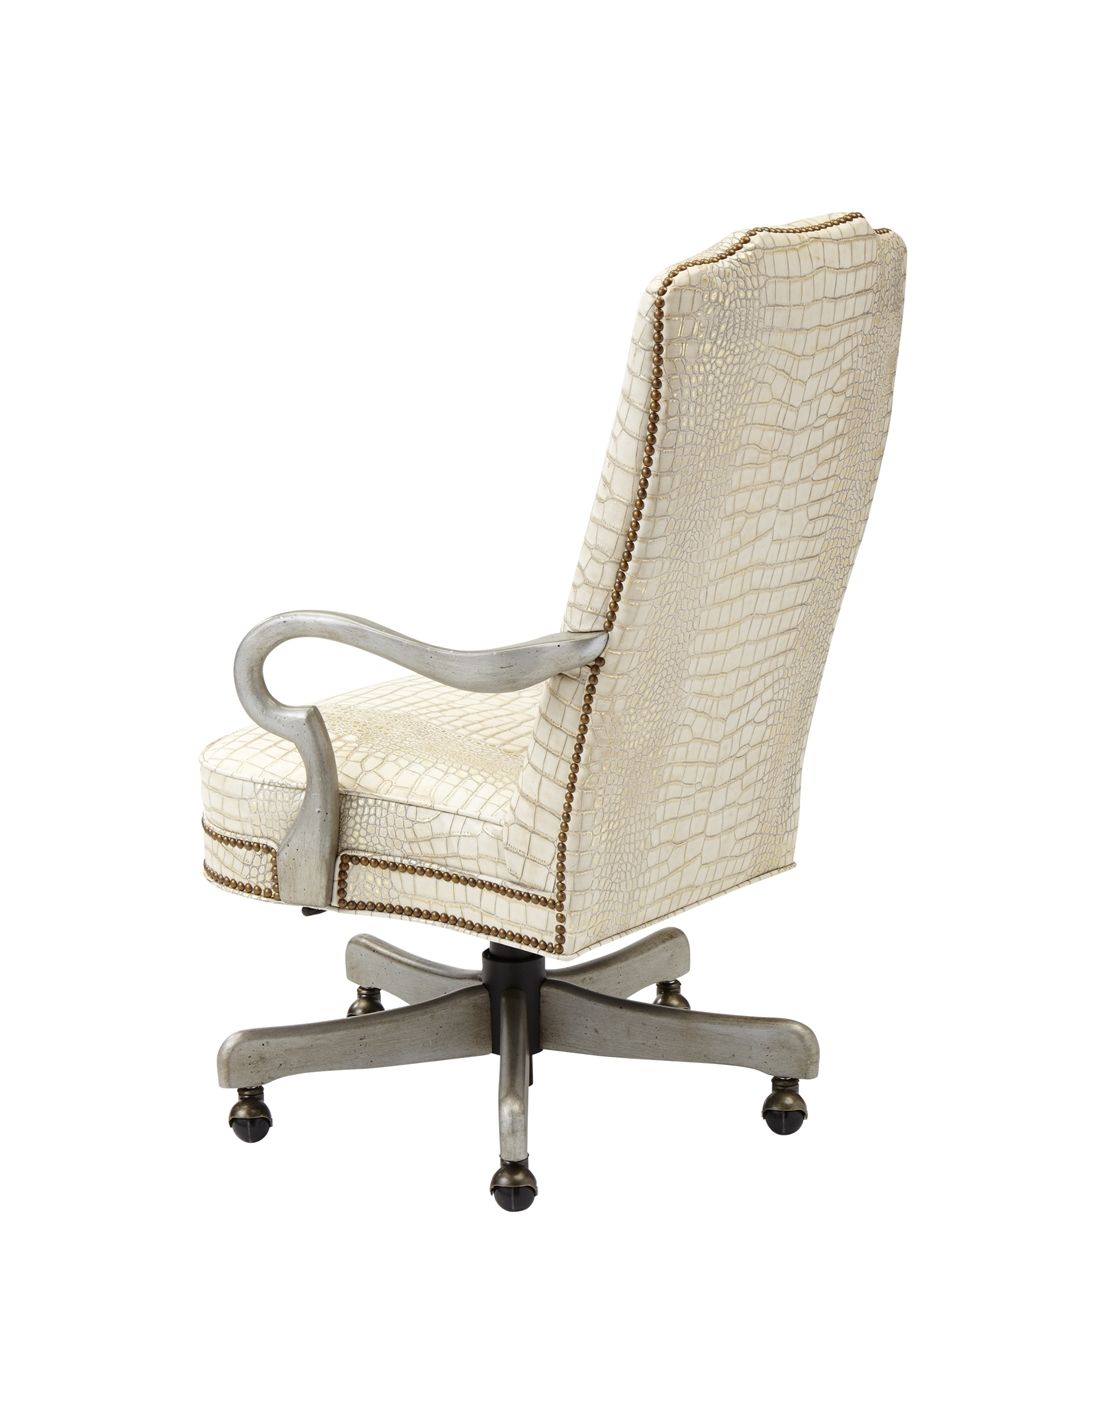 England Living Room Knox Chair with Nails 6M0004N - England Furniture - New  Tazewell, TN